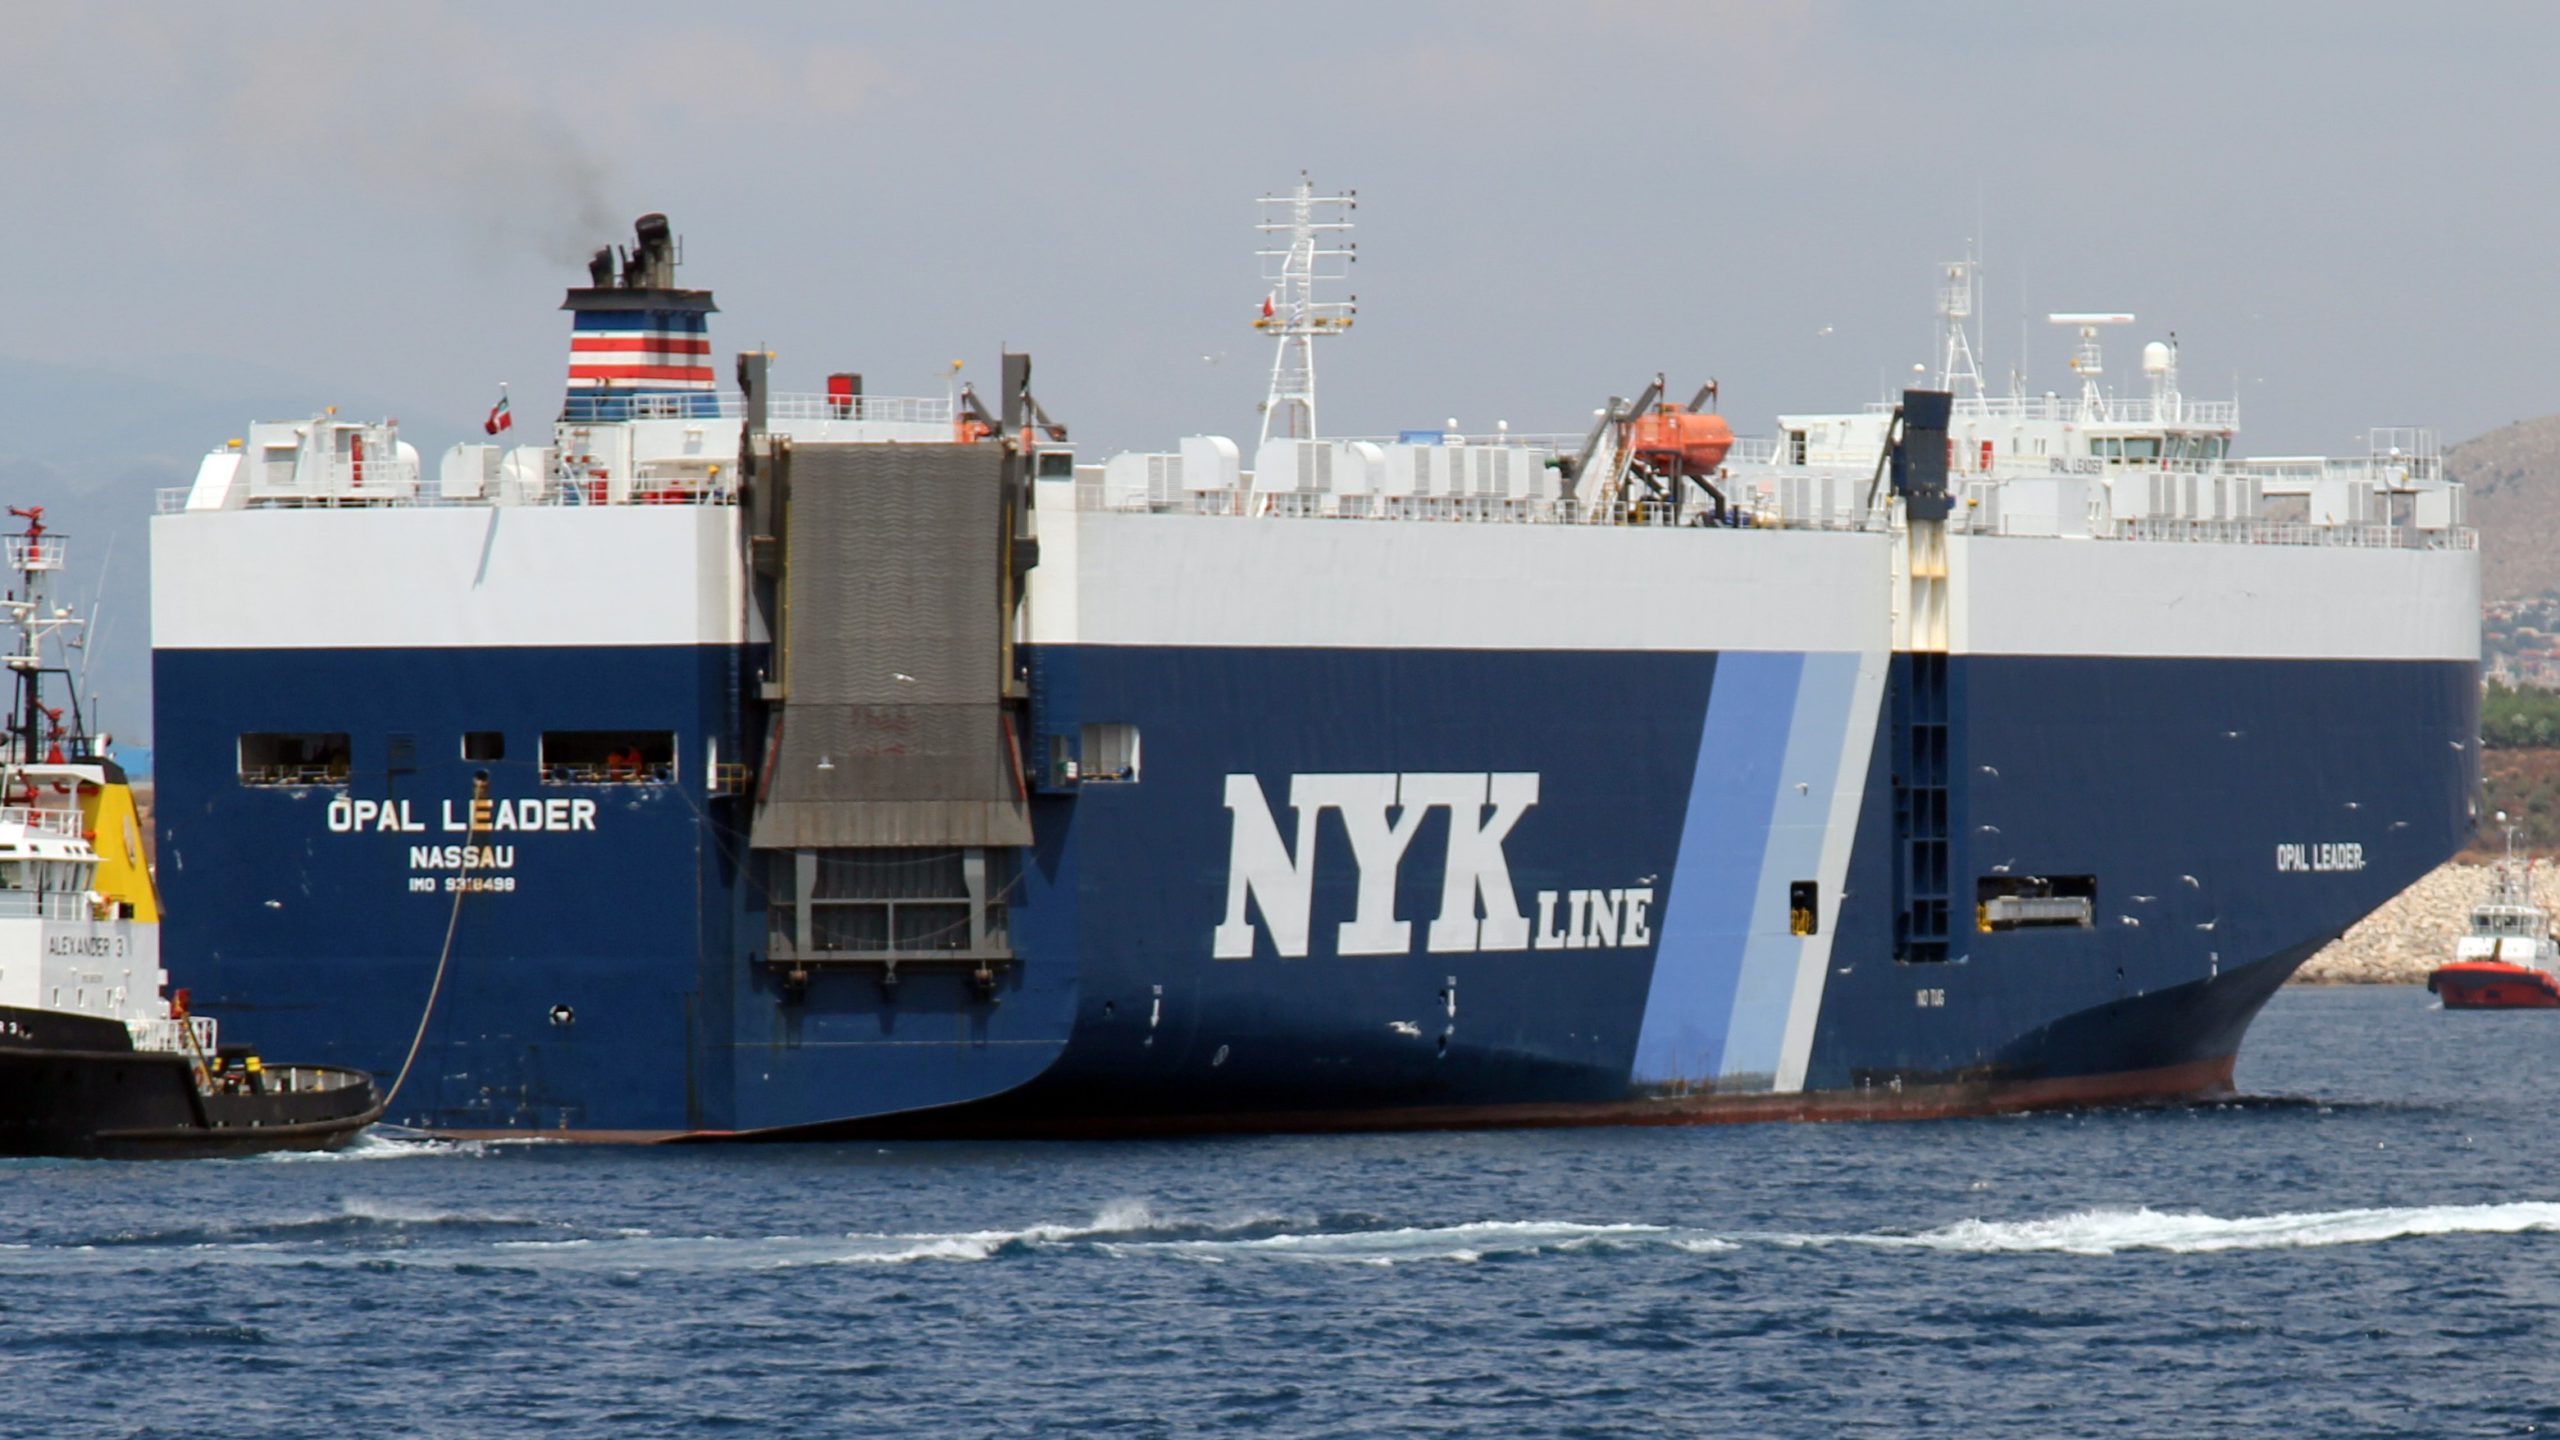 NYK Line forms partnerships to improve Japan's offshore wind power sector